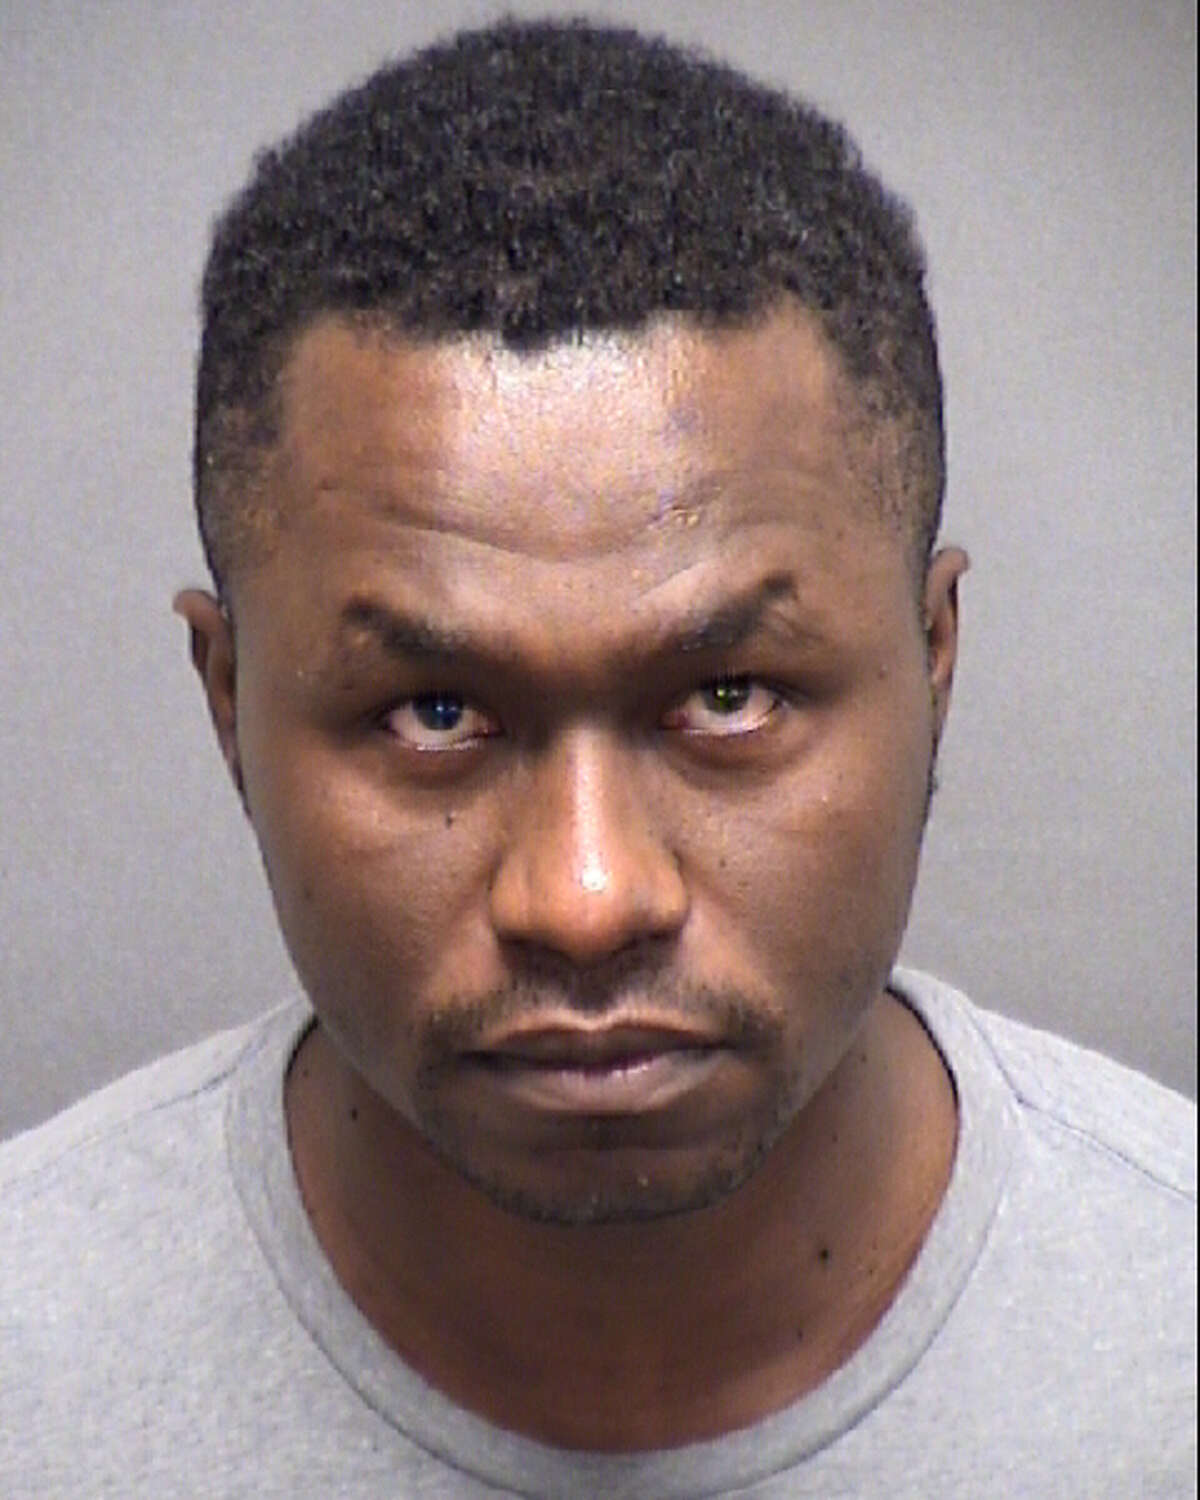 Andre McDonald was charged with murder for allegedly killing his wife Andreen McDonald, 29, who's bones were identified to be in the 600 block of Specht Road on July 13, 2019.